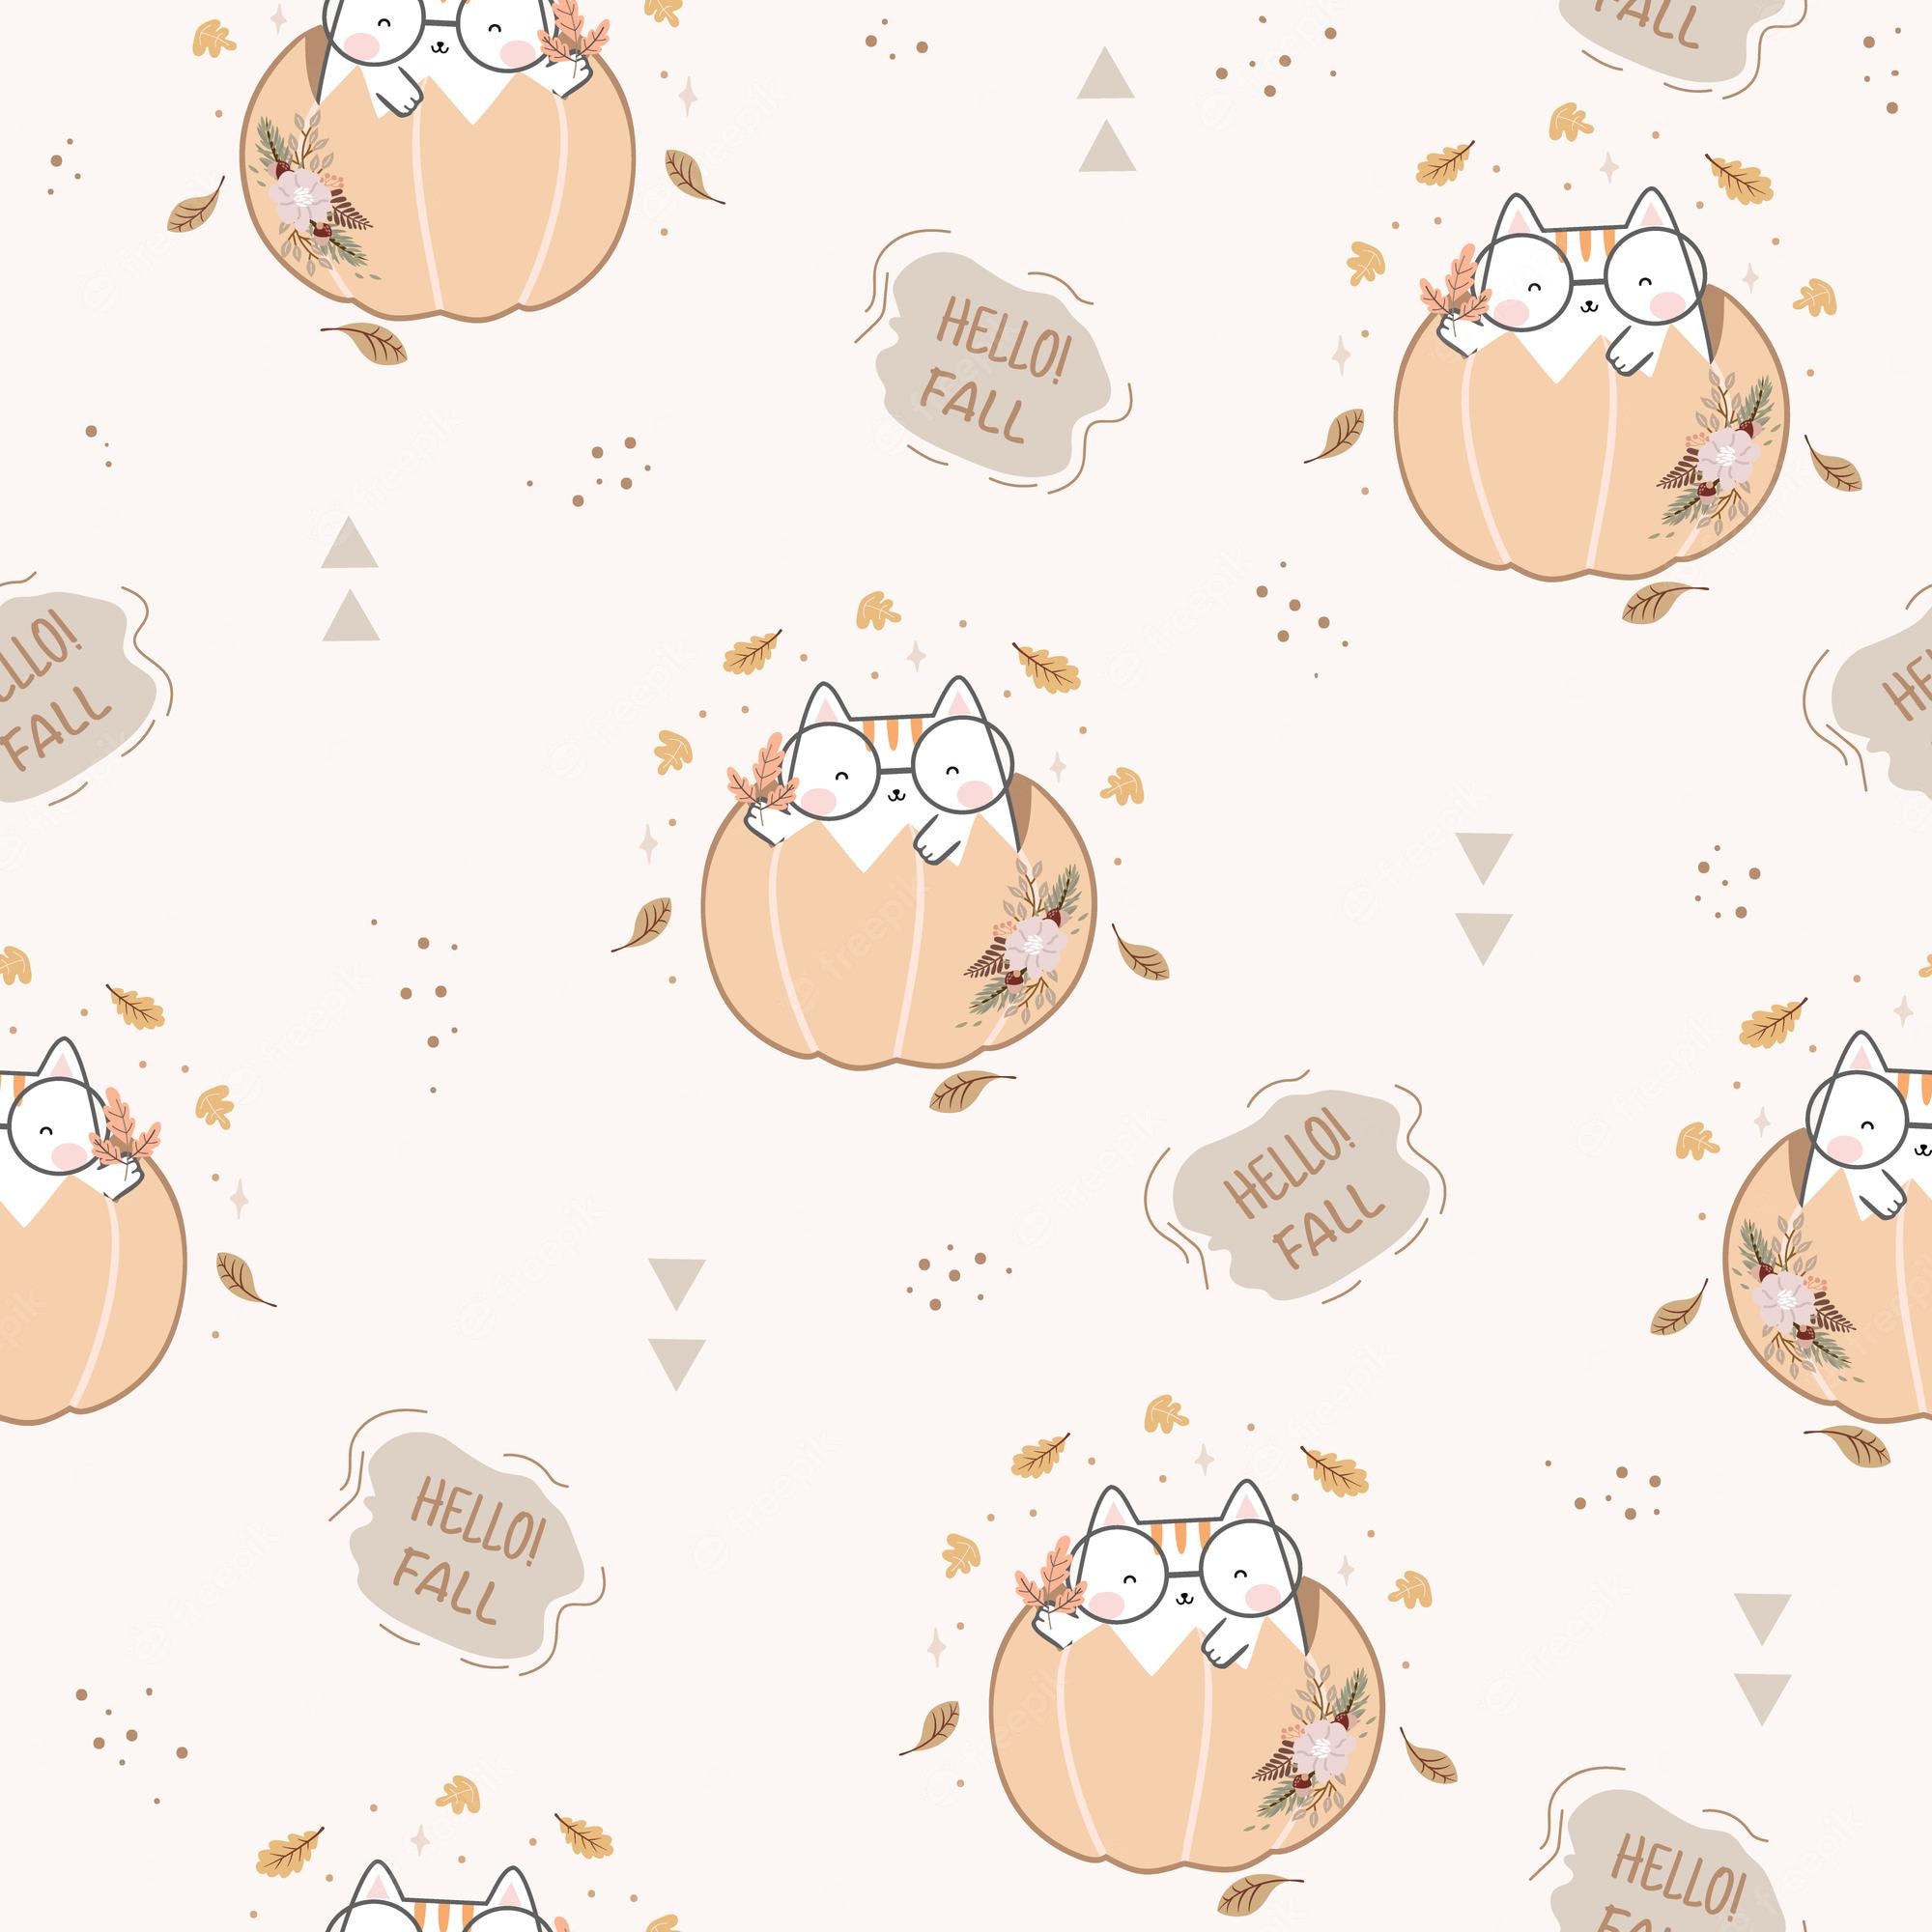 Premium vector kawaii autumn cat seamless pattern design pattern for print textile fabric wrapping paper wallp